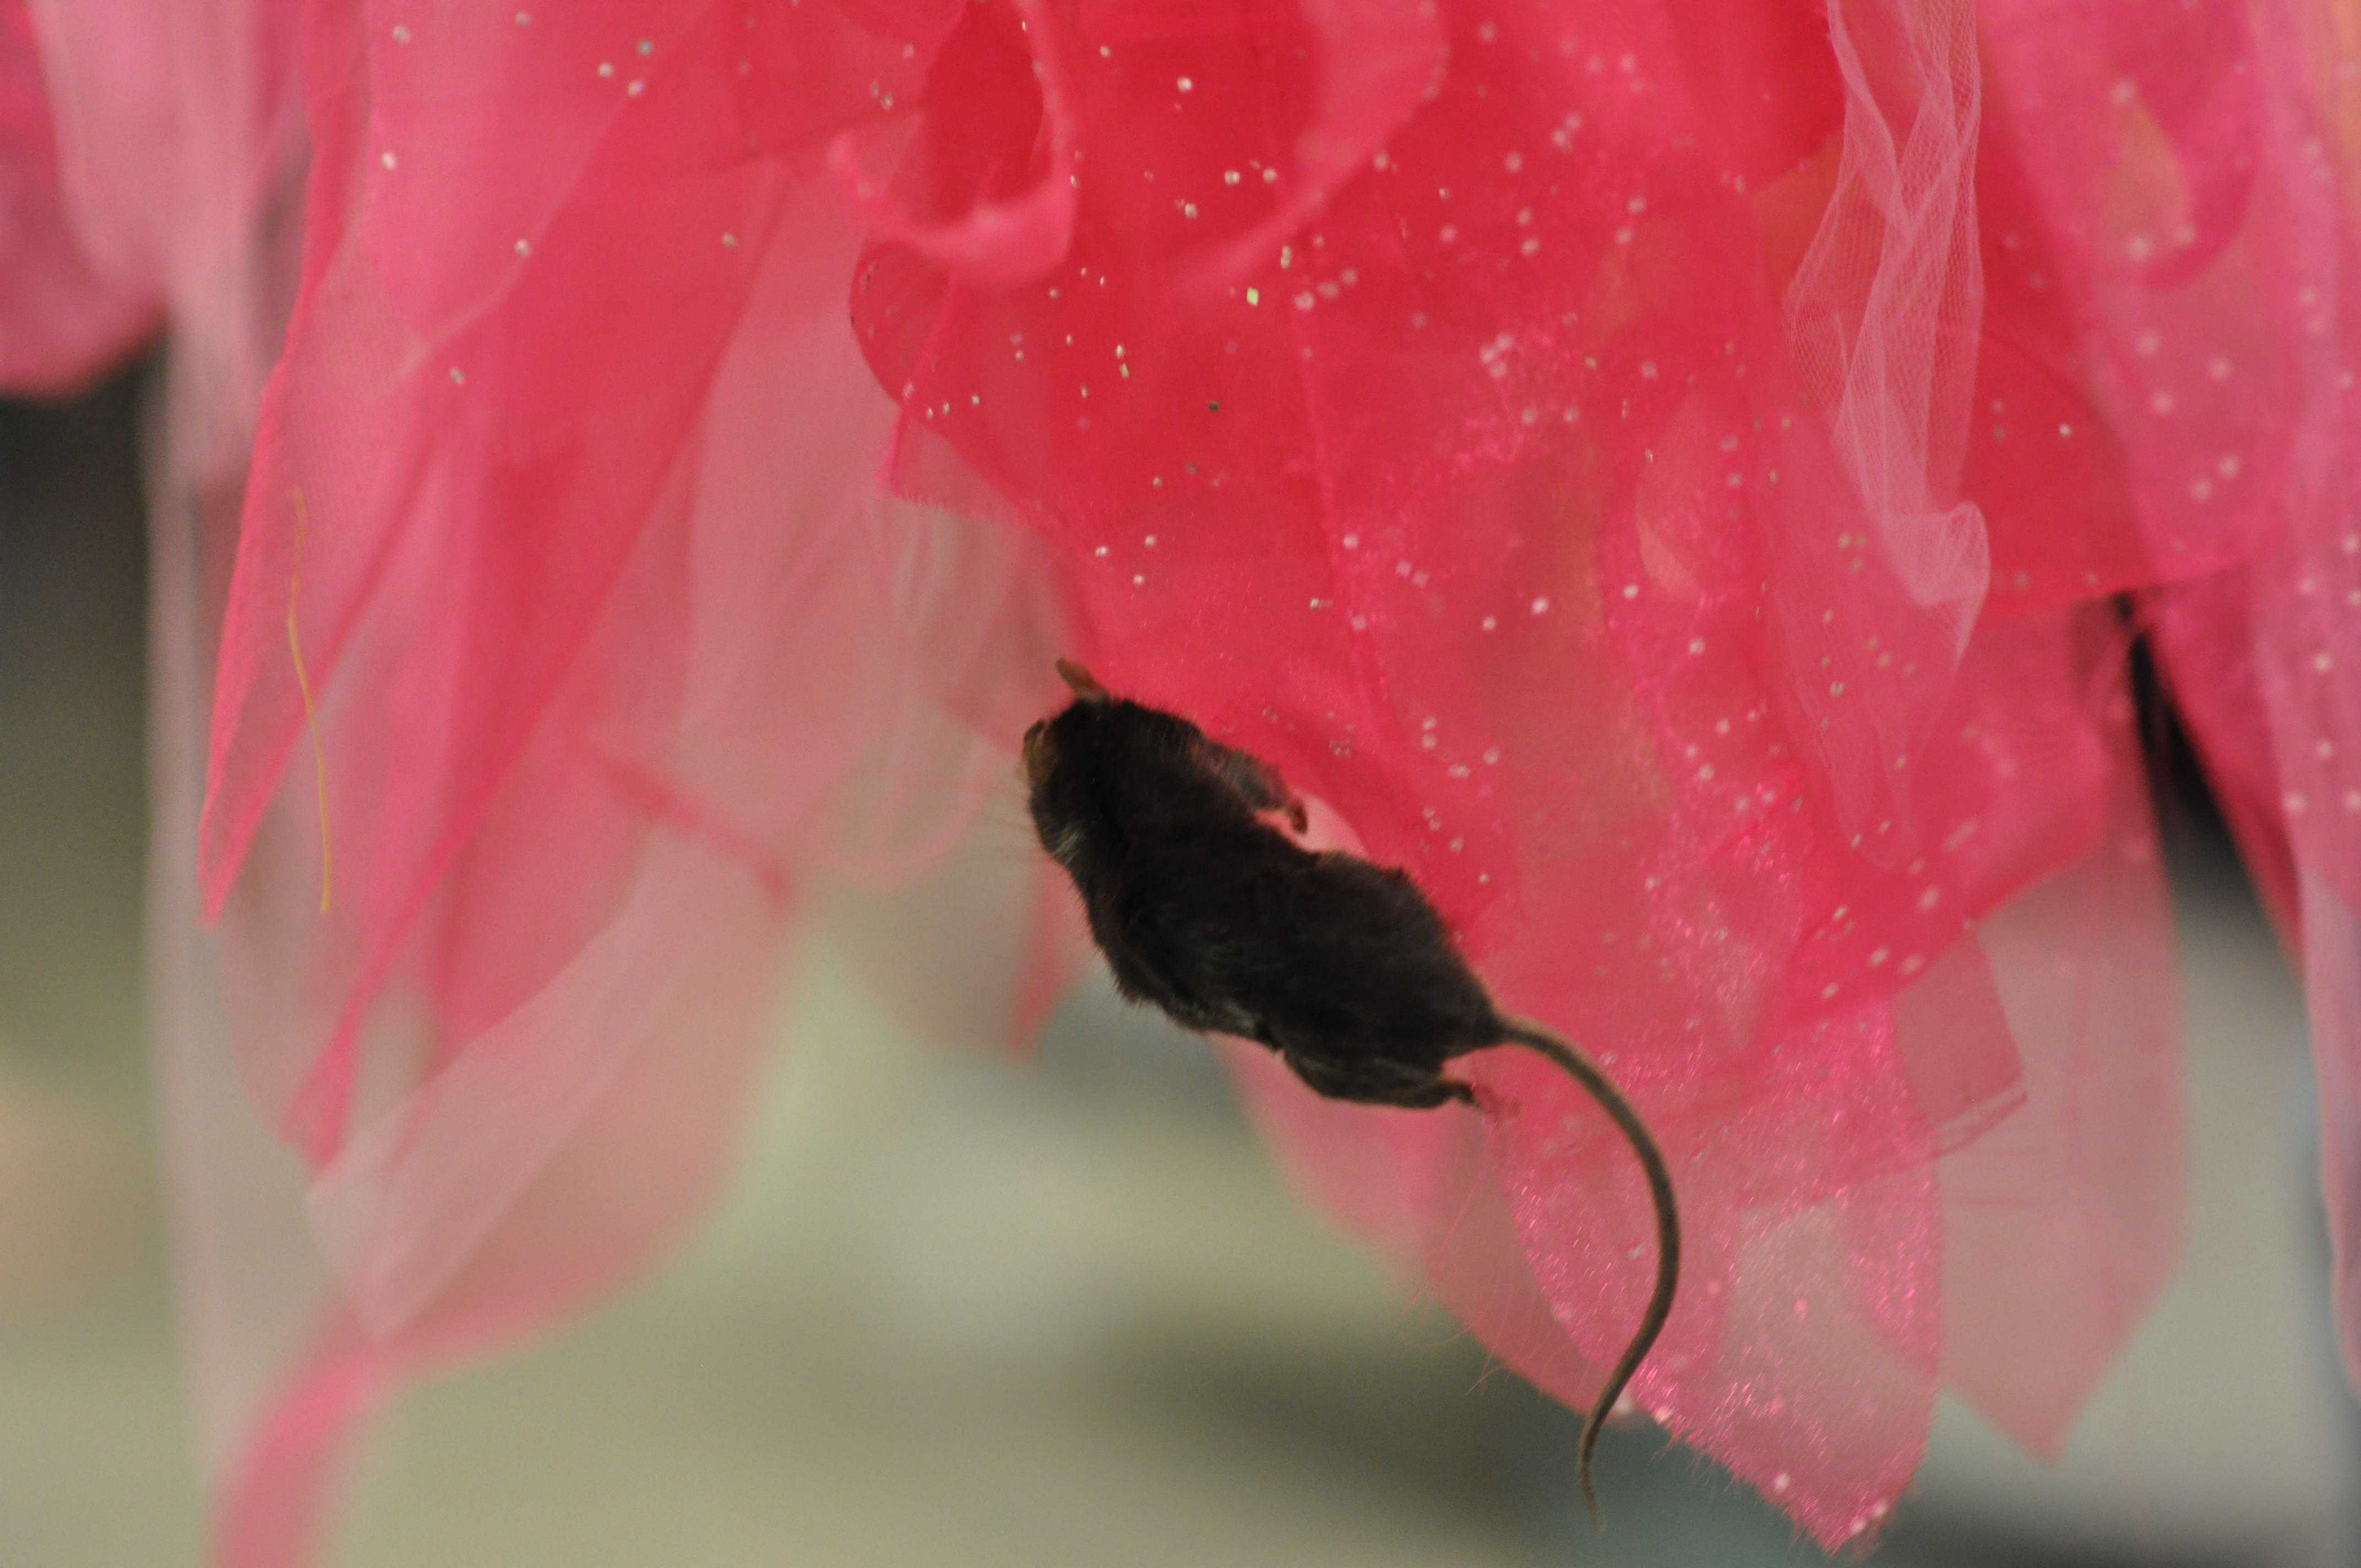 A mouse was discovere today on the pink bird costume recently used in the Suessical.